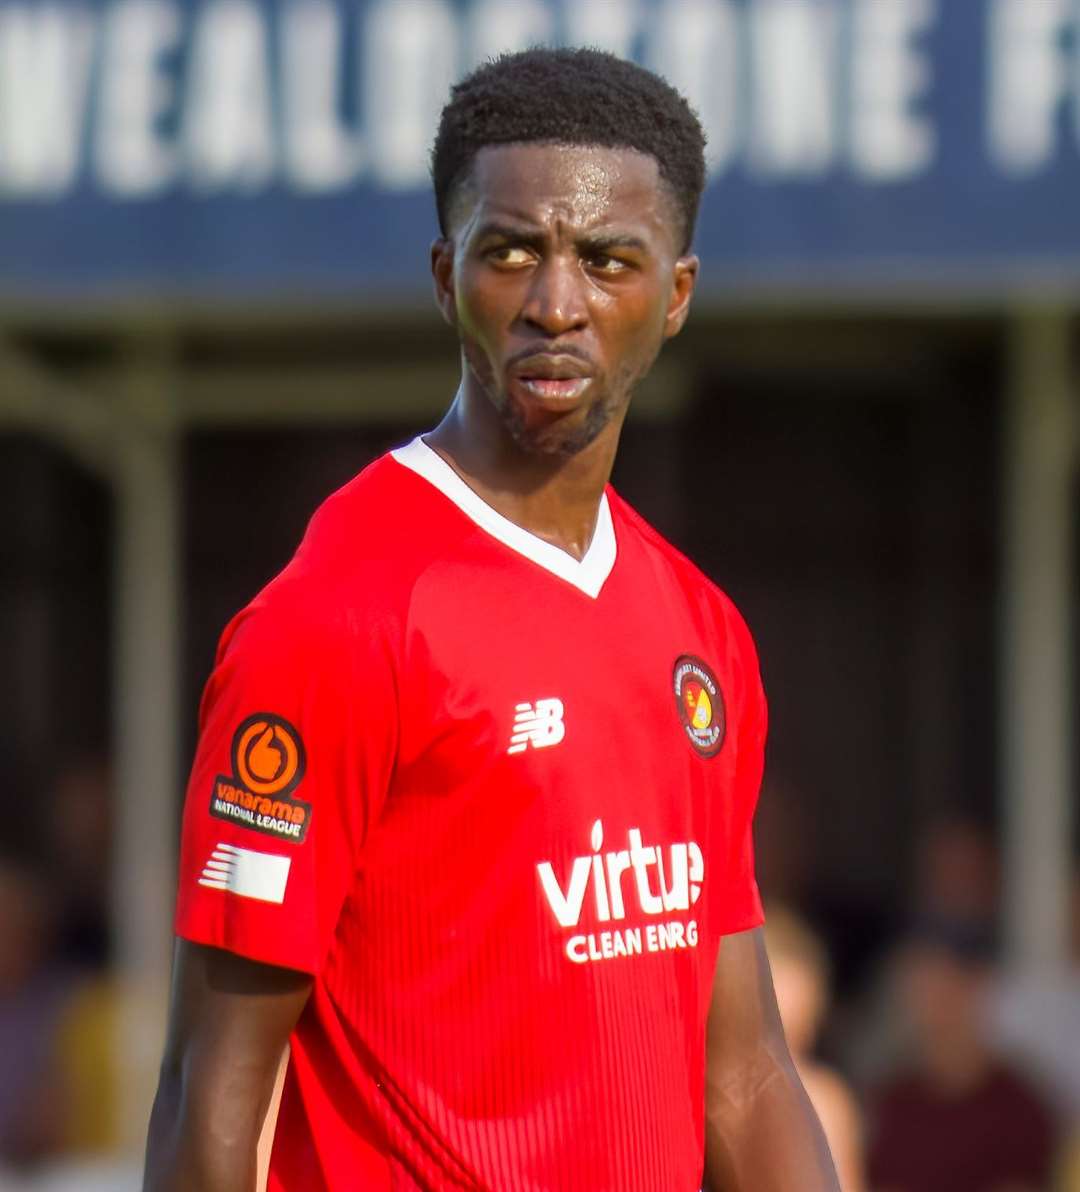 Nathan Odokonyero scored his first Ebbsfleet goal in the 6-1 defeat at Altrincham on Saturday. Picture: Ed Miller/EUFC